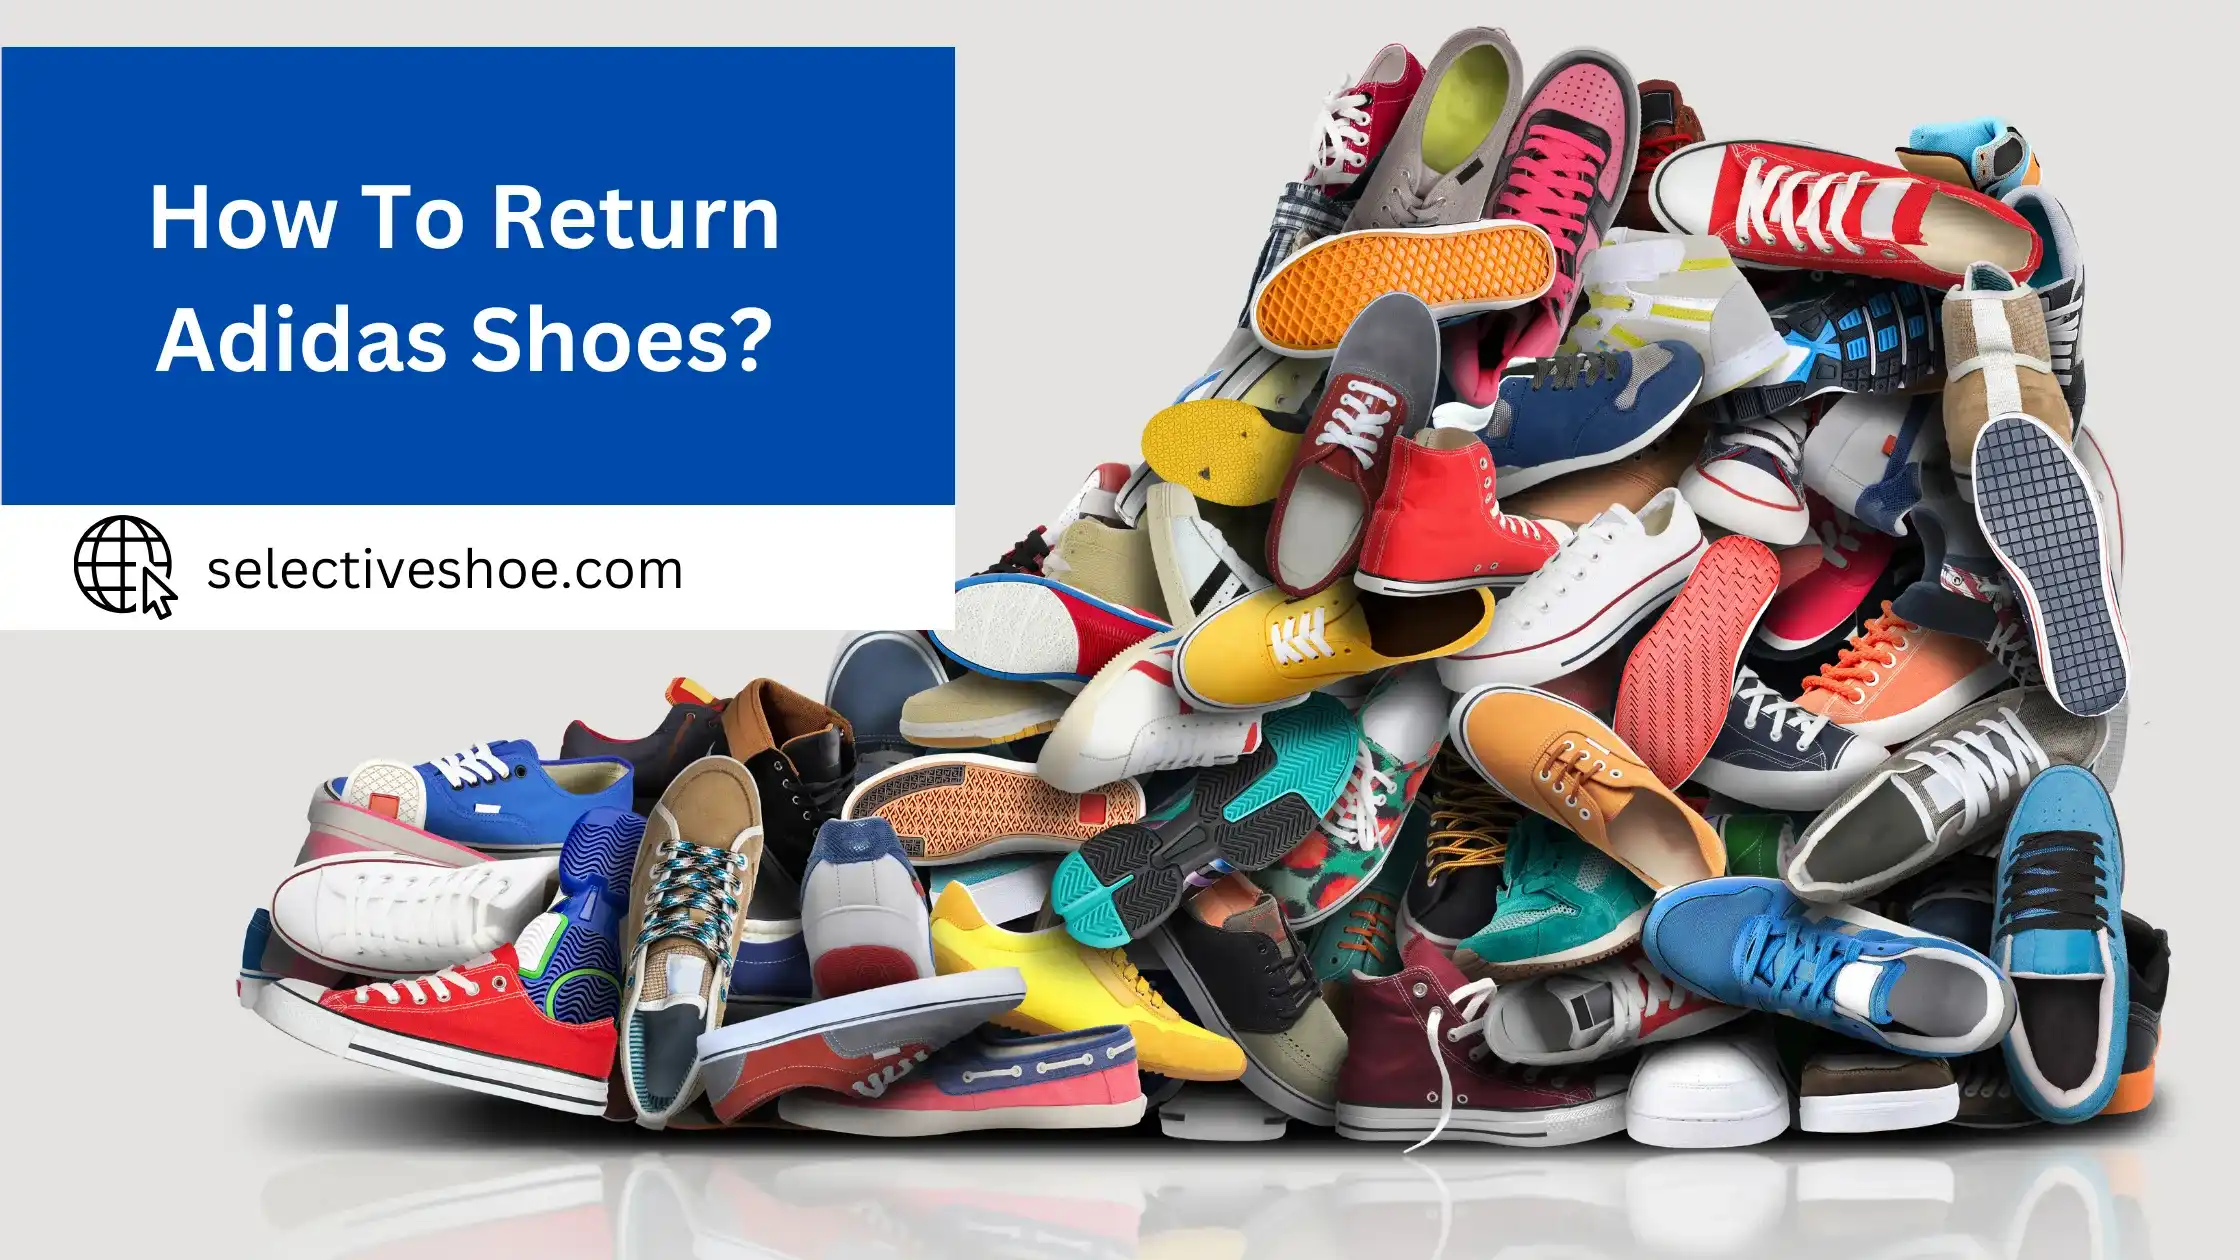 How To Return Adidas Shoes? Quick and Effective Tips